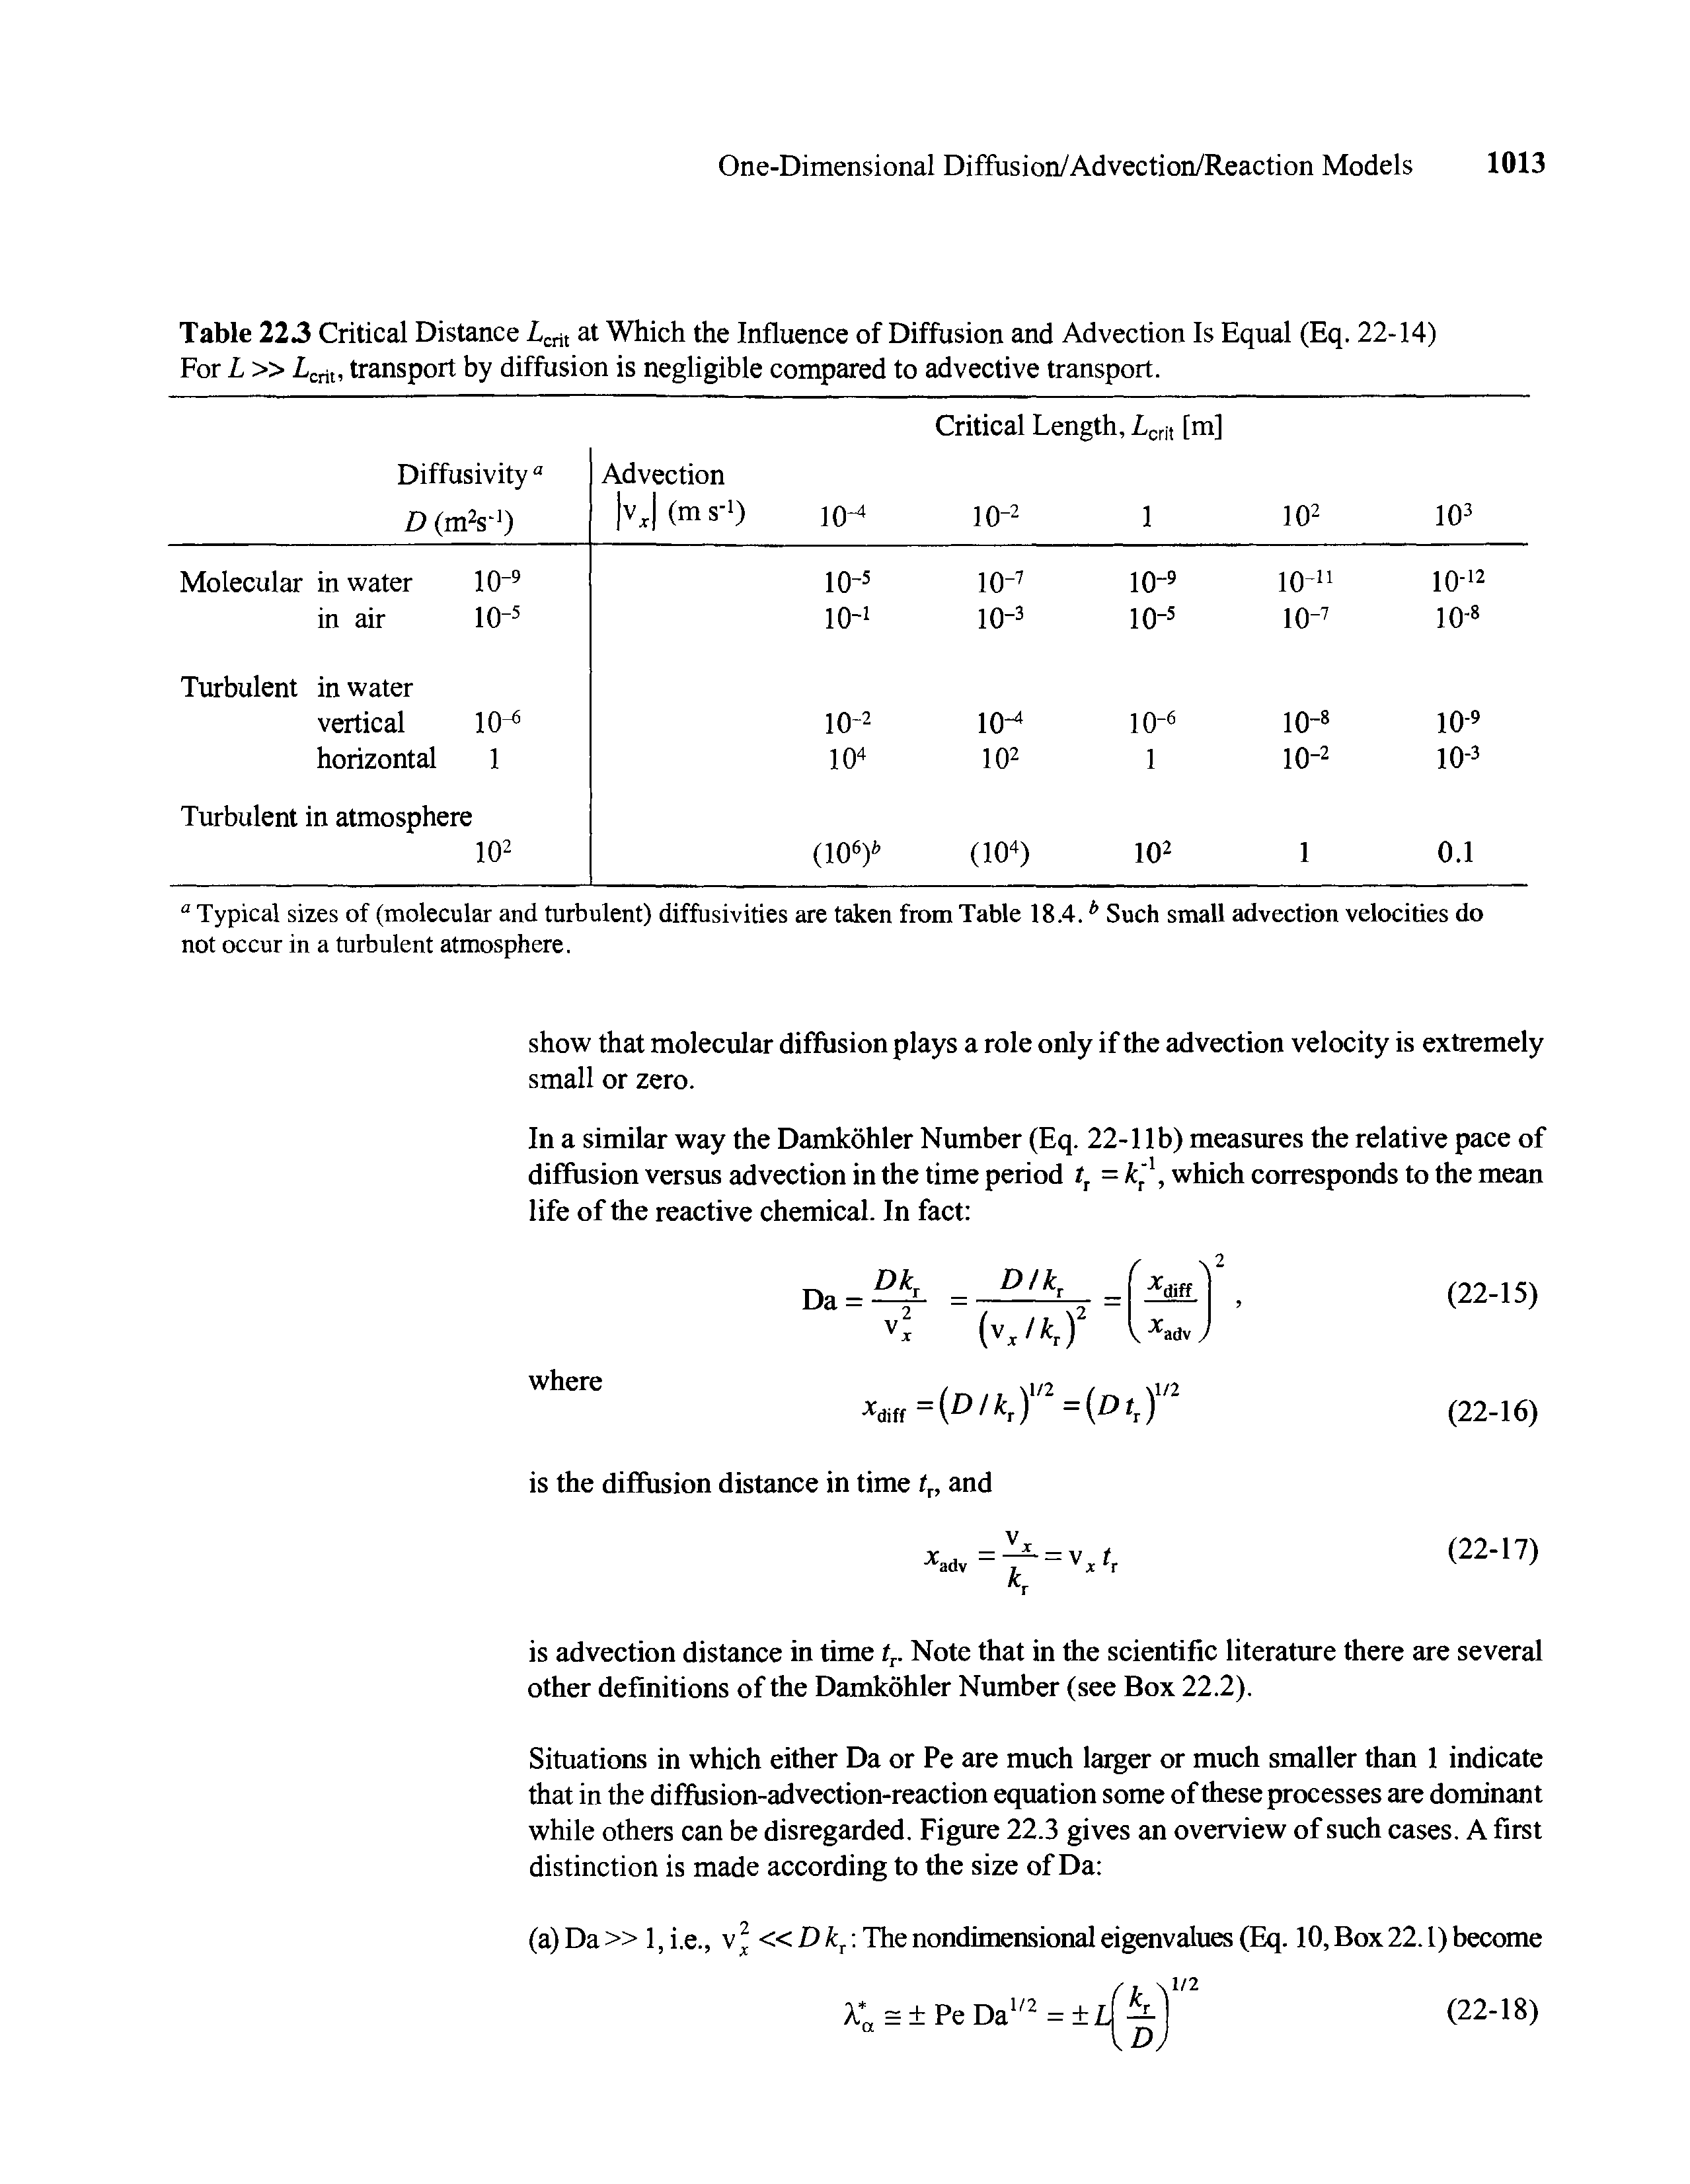 Table 223 Critical Distance Z,crit at Which the Influence of Diffusion and Advection Is Equal (Eq. 22-14) For L Lcnl, transport by diffusion is negligible compared to advective transport.